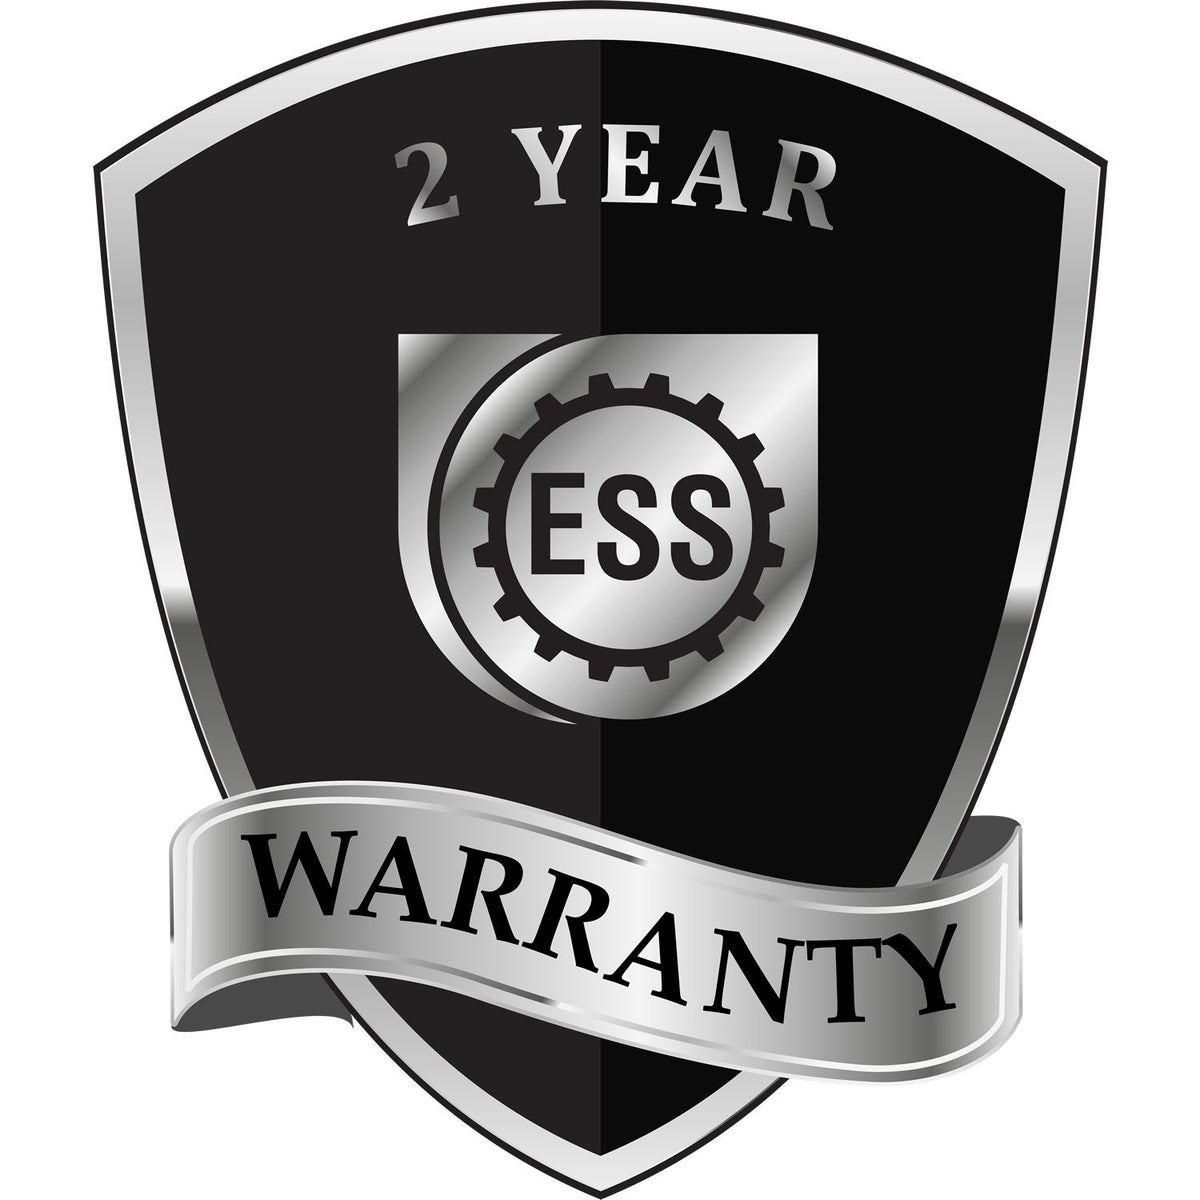 A badge or emblem showing a warranty icon for the Soft Pennsylvania Professional Engineer Seal